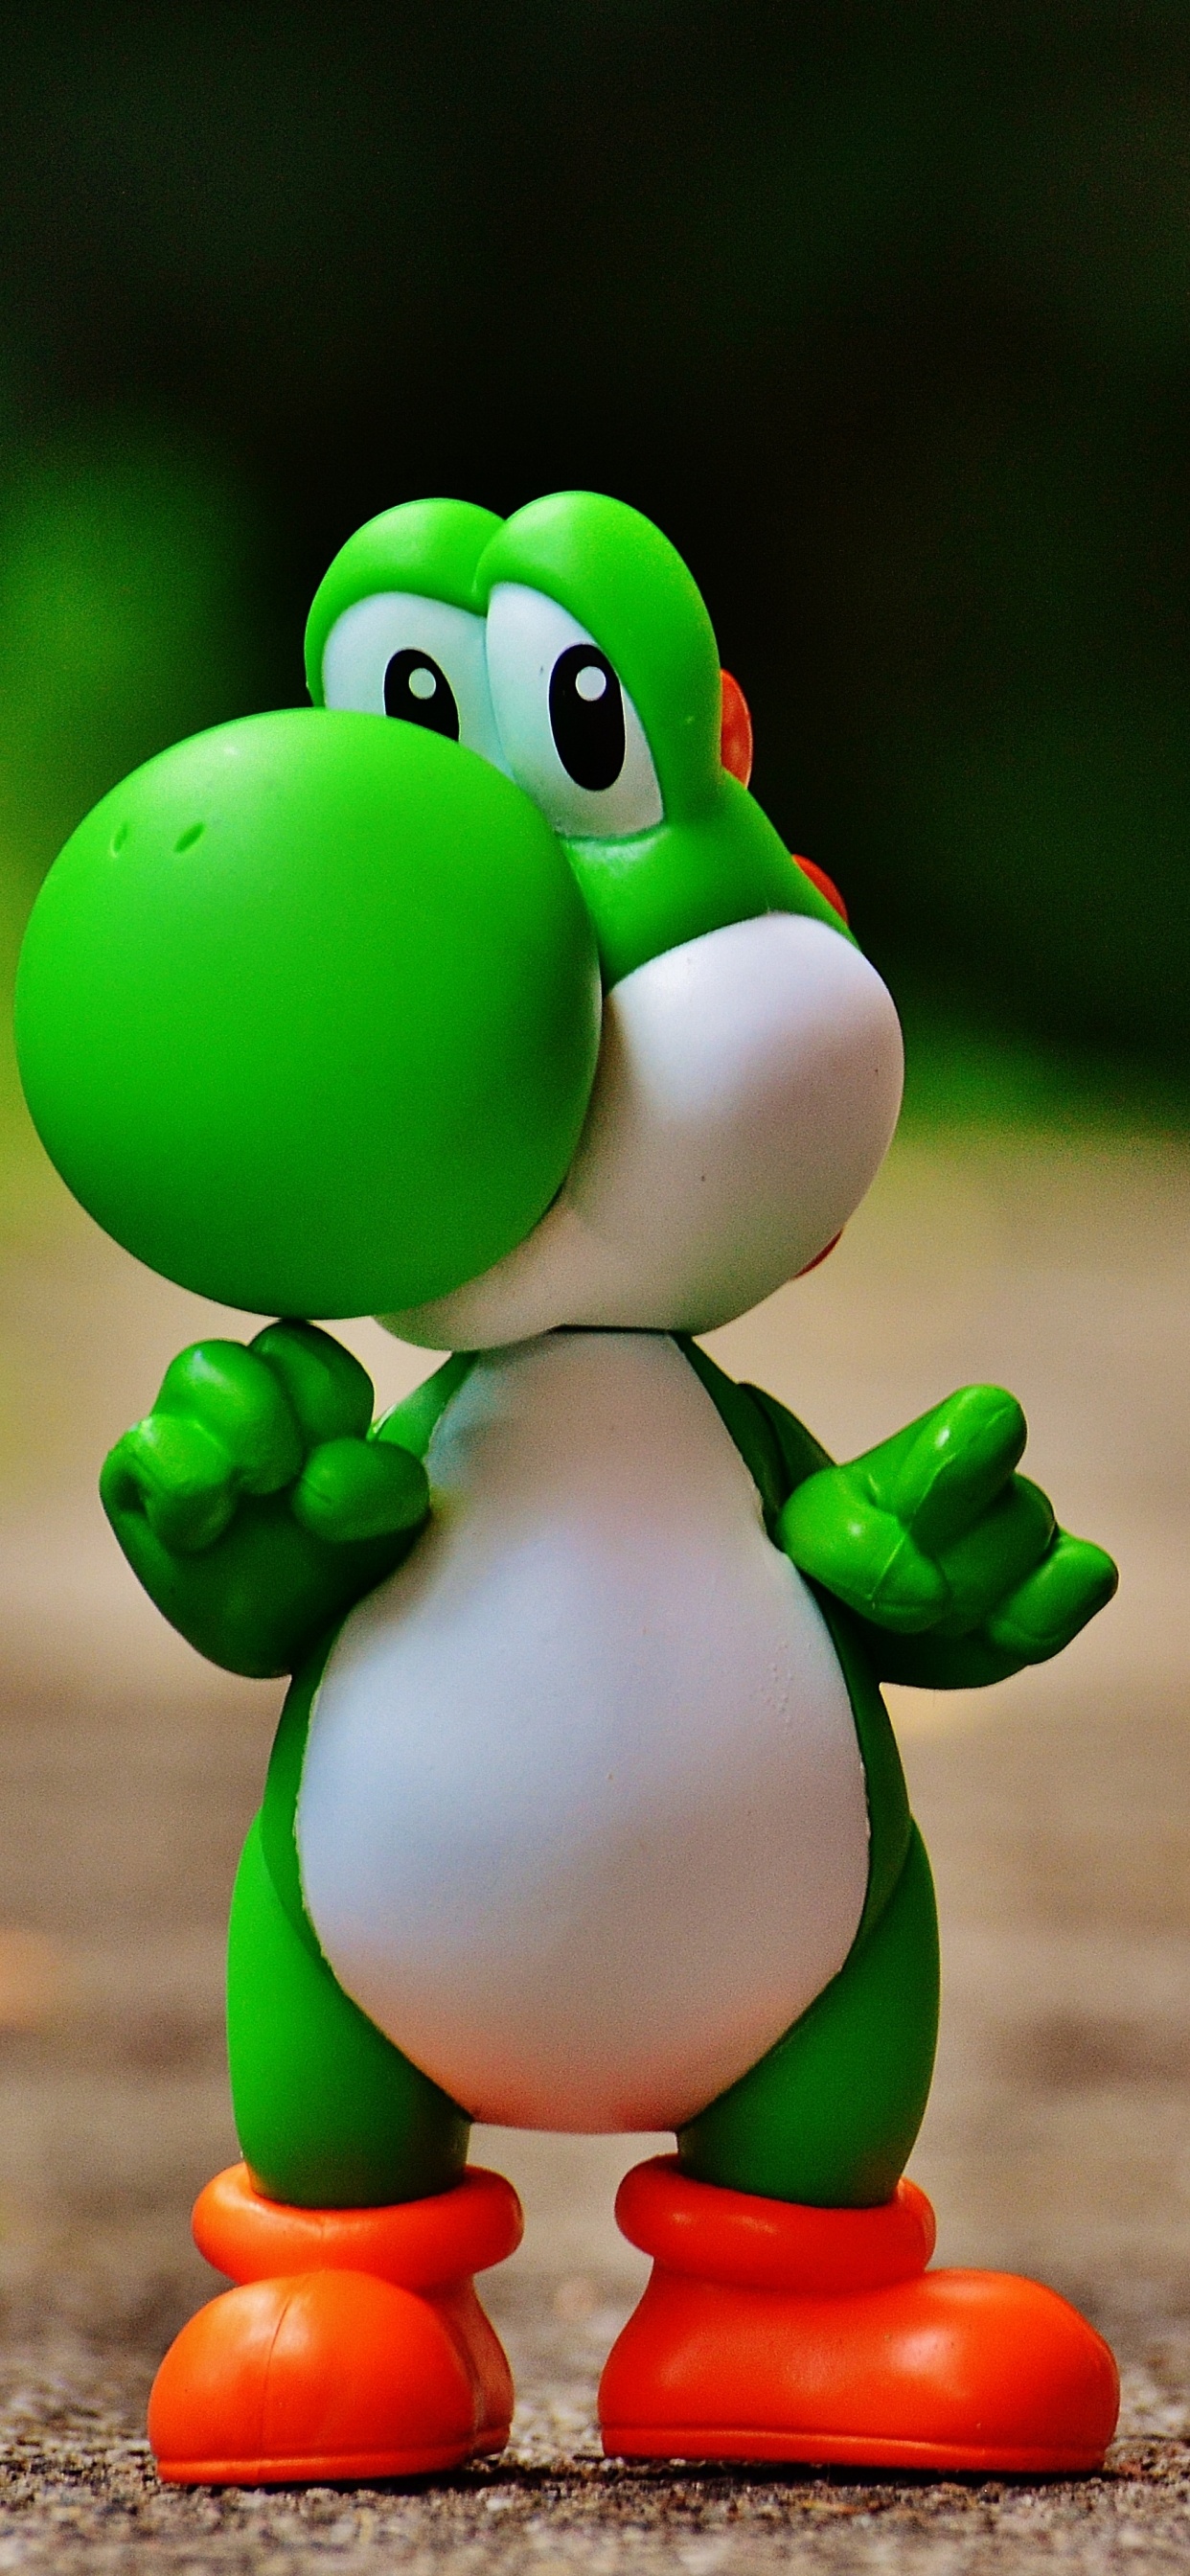 Yoshis Island, Super Mario World, Green, Toy, Action Figure. Wallpaper in 1242x2688 Resolution